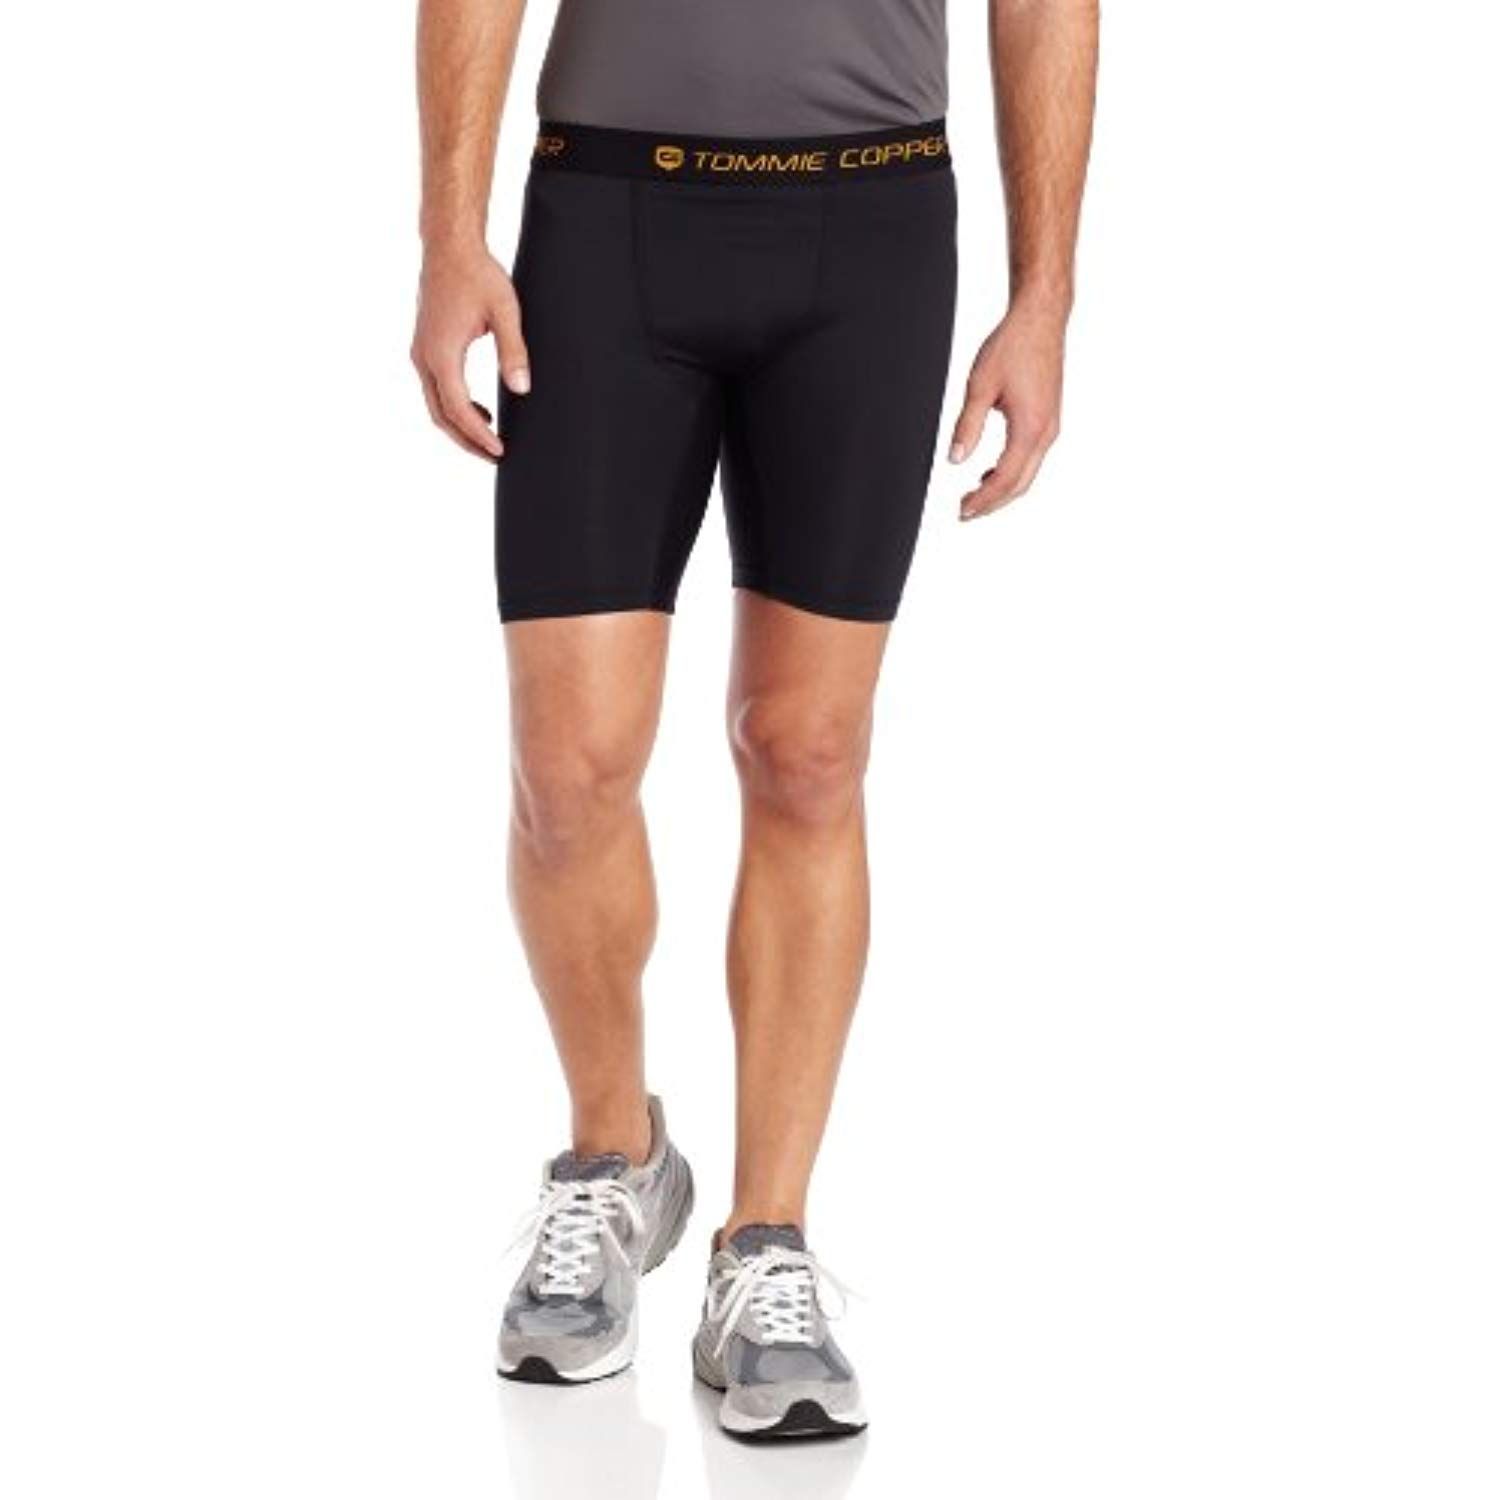 15 Best Copper Compression Shorts For 2023